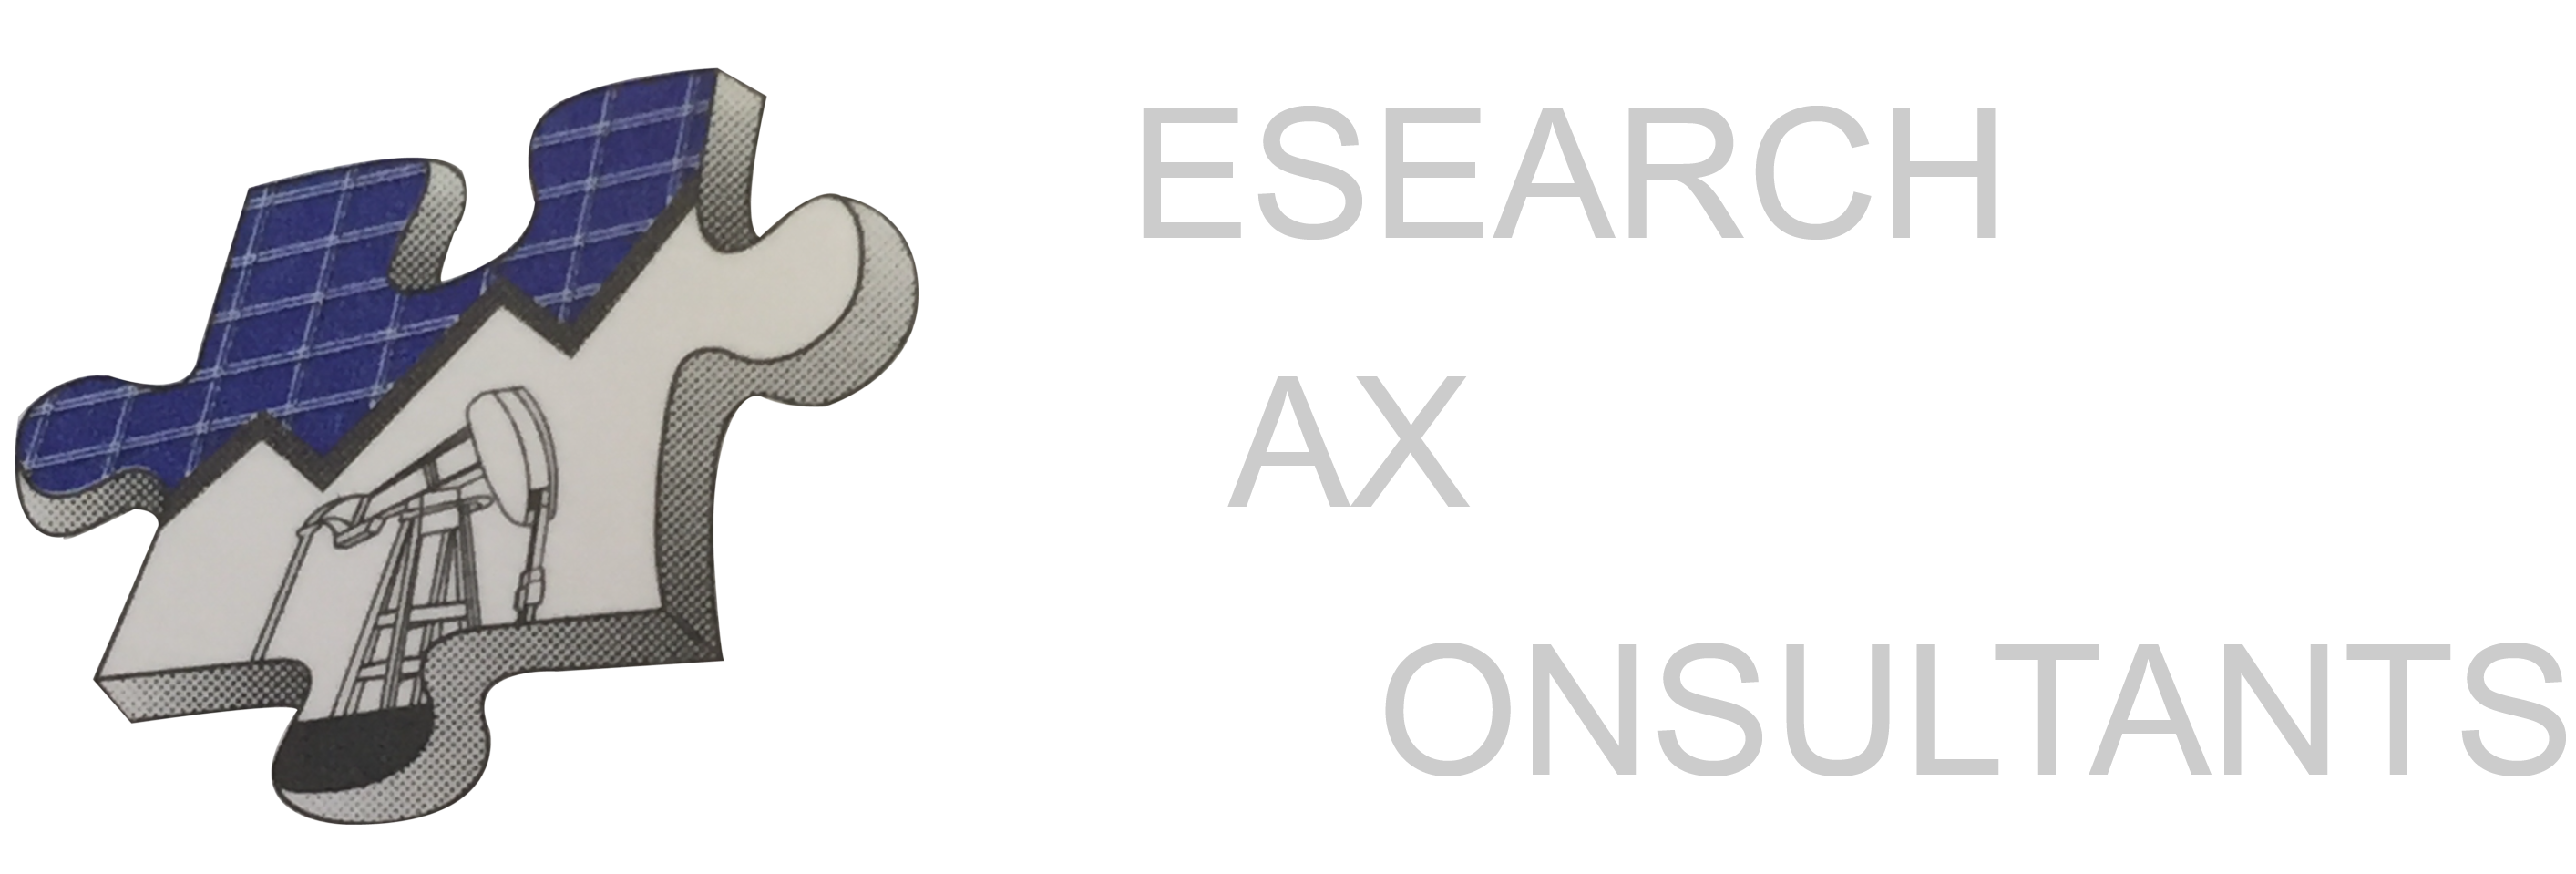 Research Tax Consultants